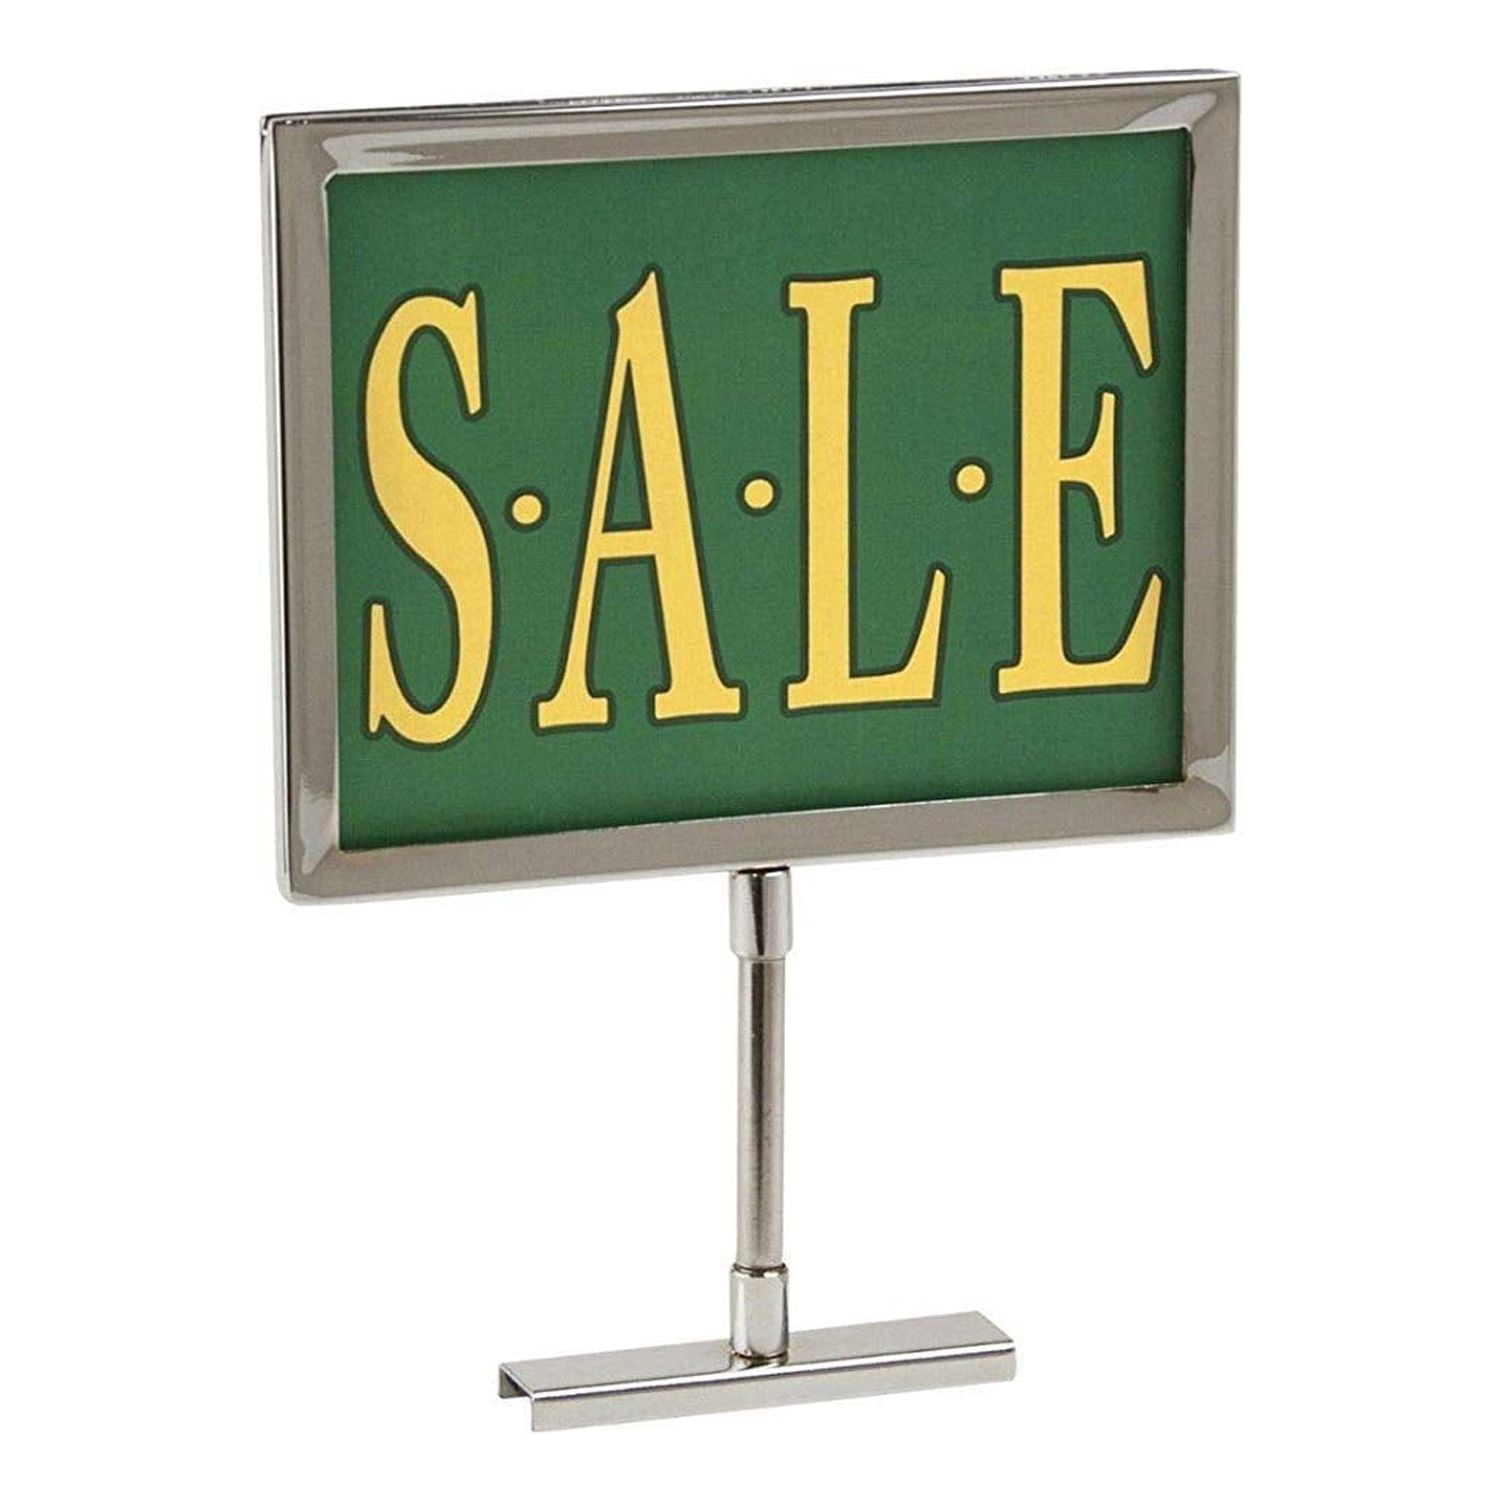 6 Pack Clear Sign Holders 8.5x11 - Table Top Plastic Display Stand